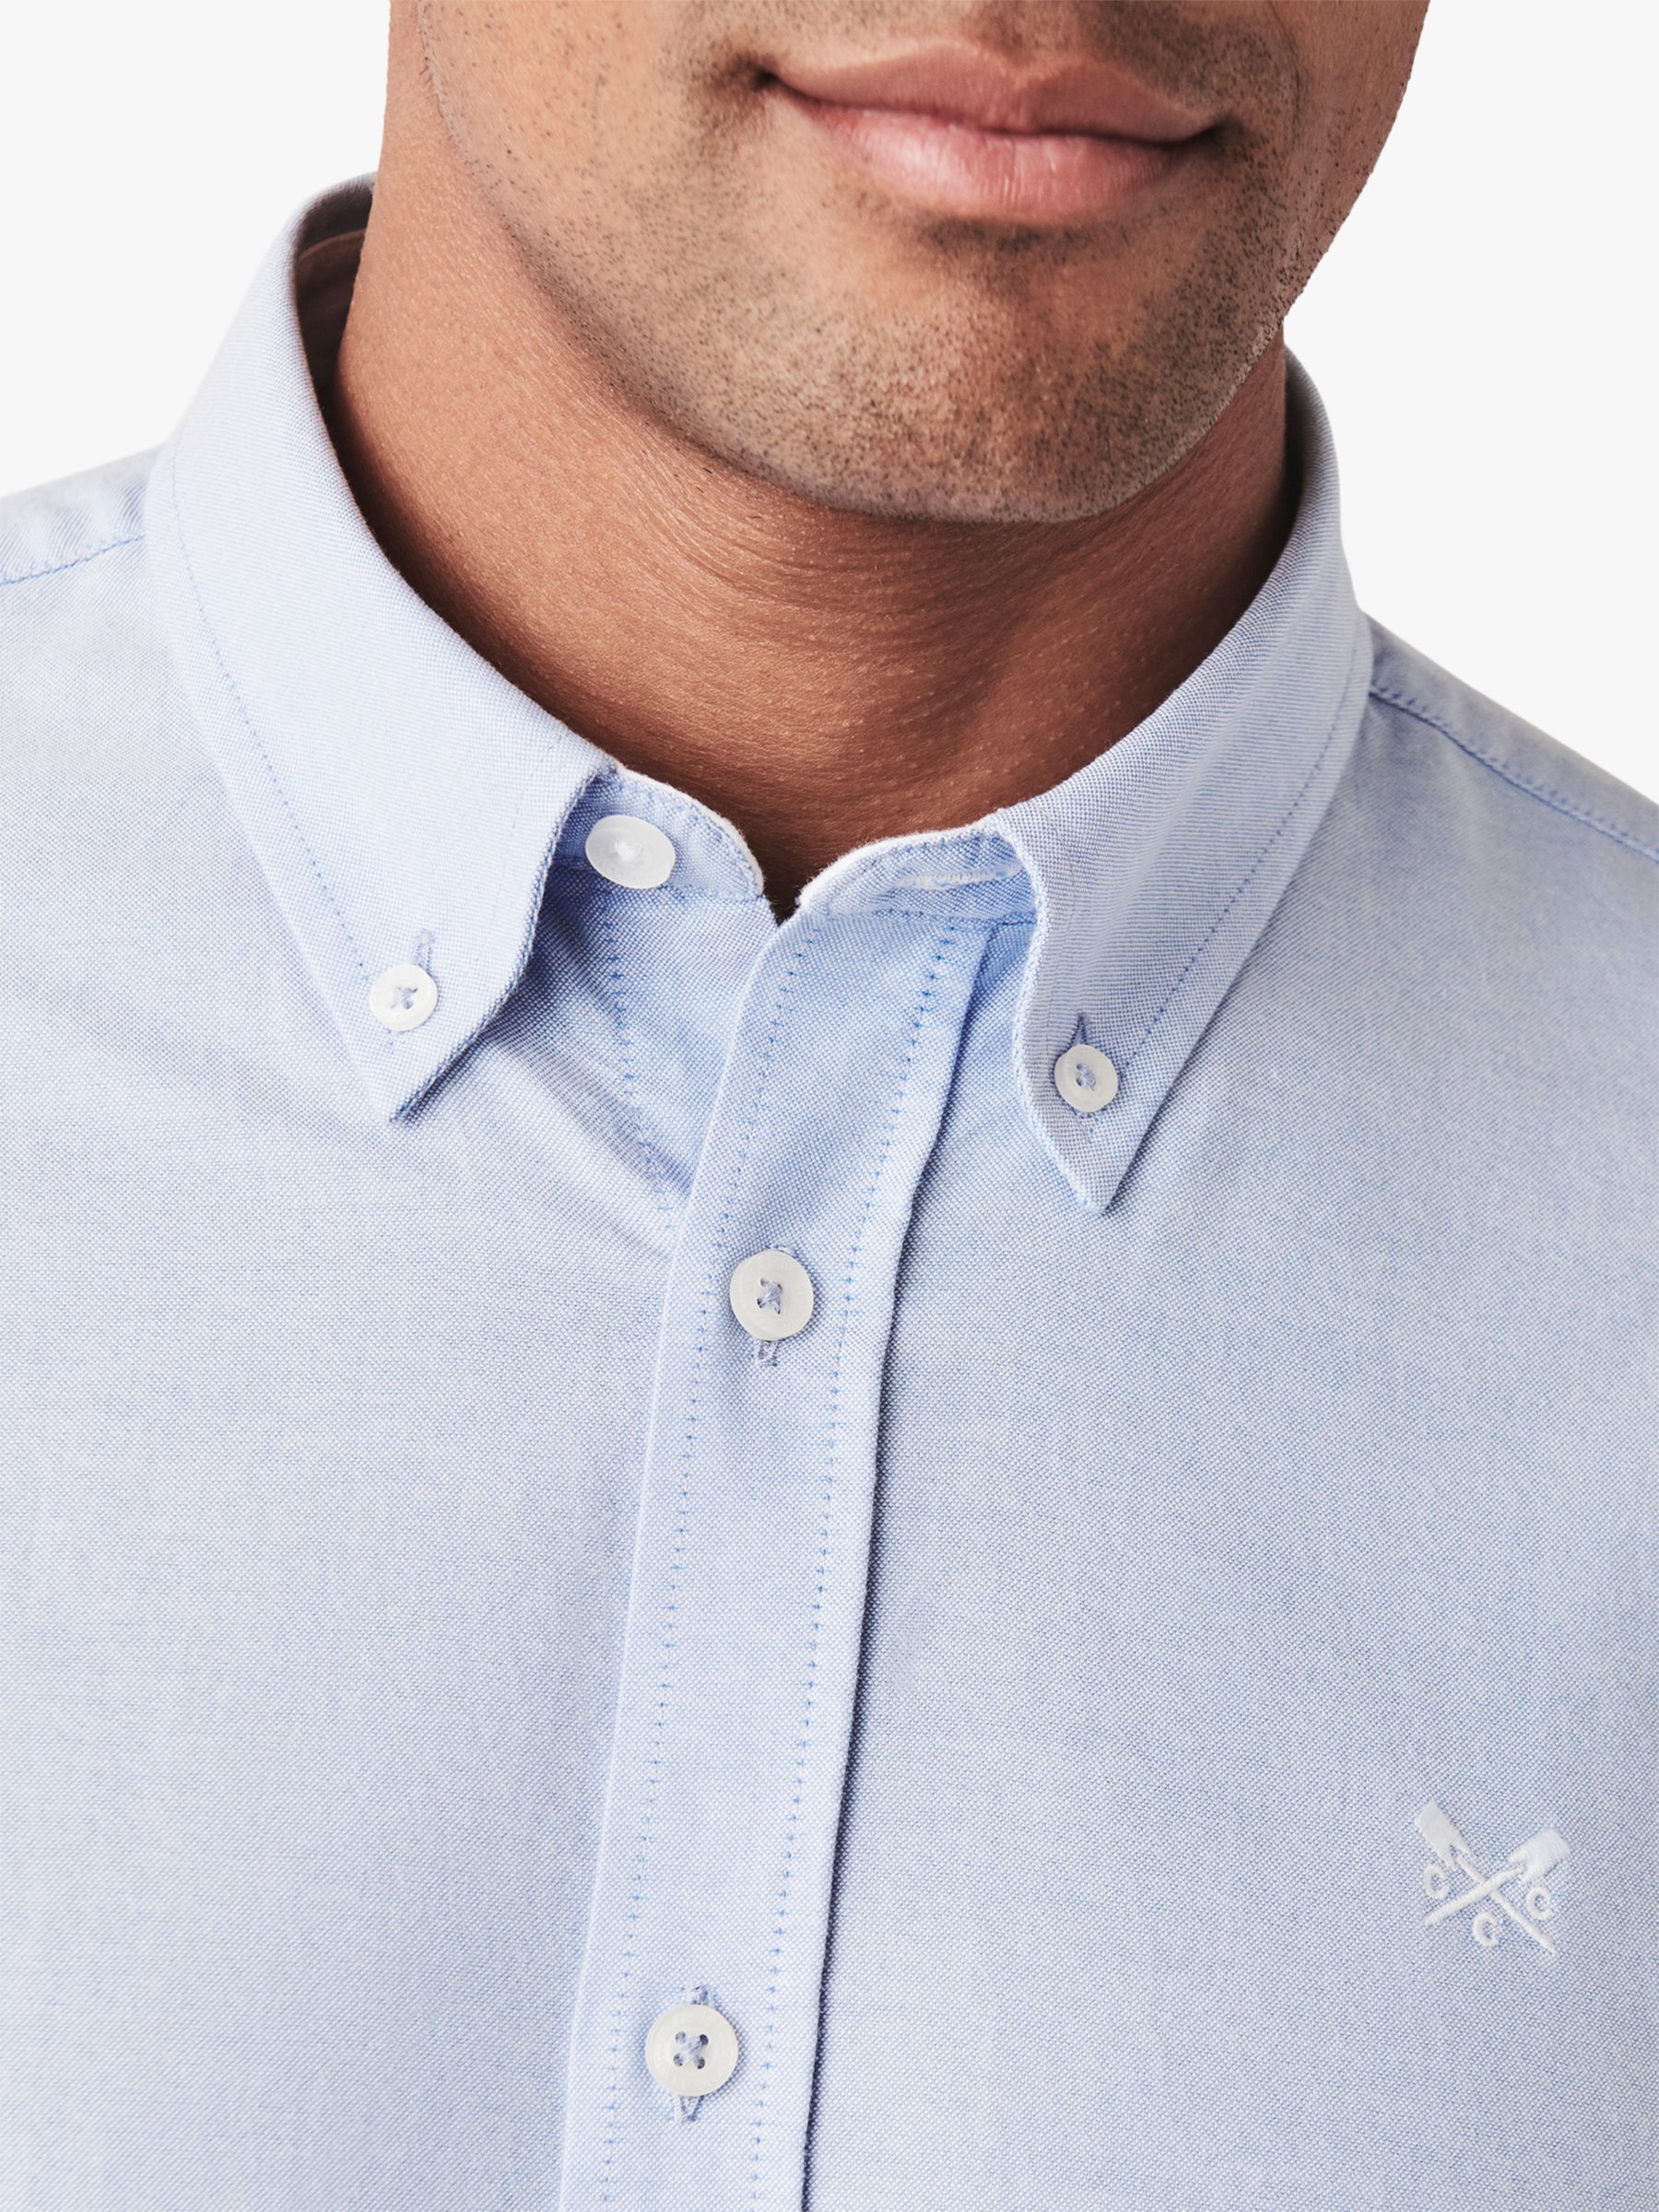 Buy Crew Clothing Slim Fit Long Sleeve Oxford Shirt Online at johnlewis.com